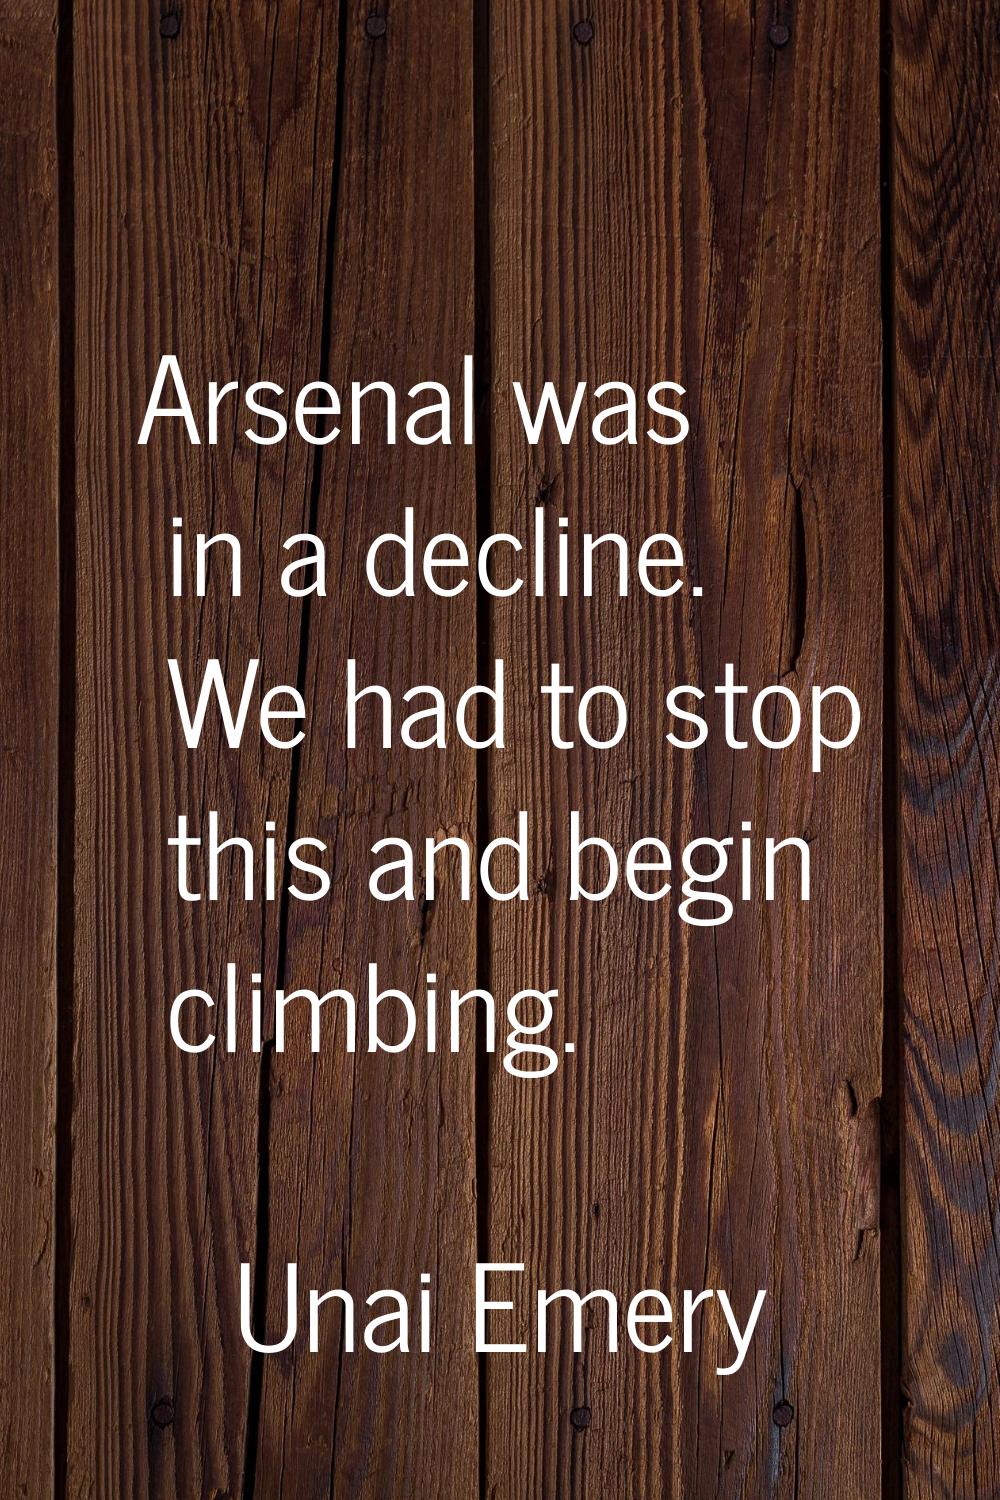 Arsenal was in a decline. We had to stop this and begin climbing.